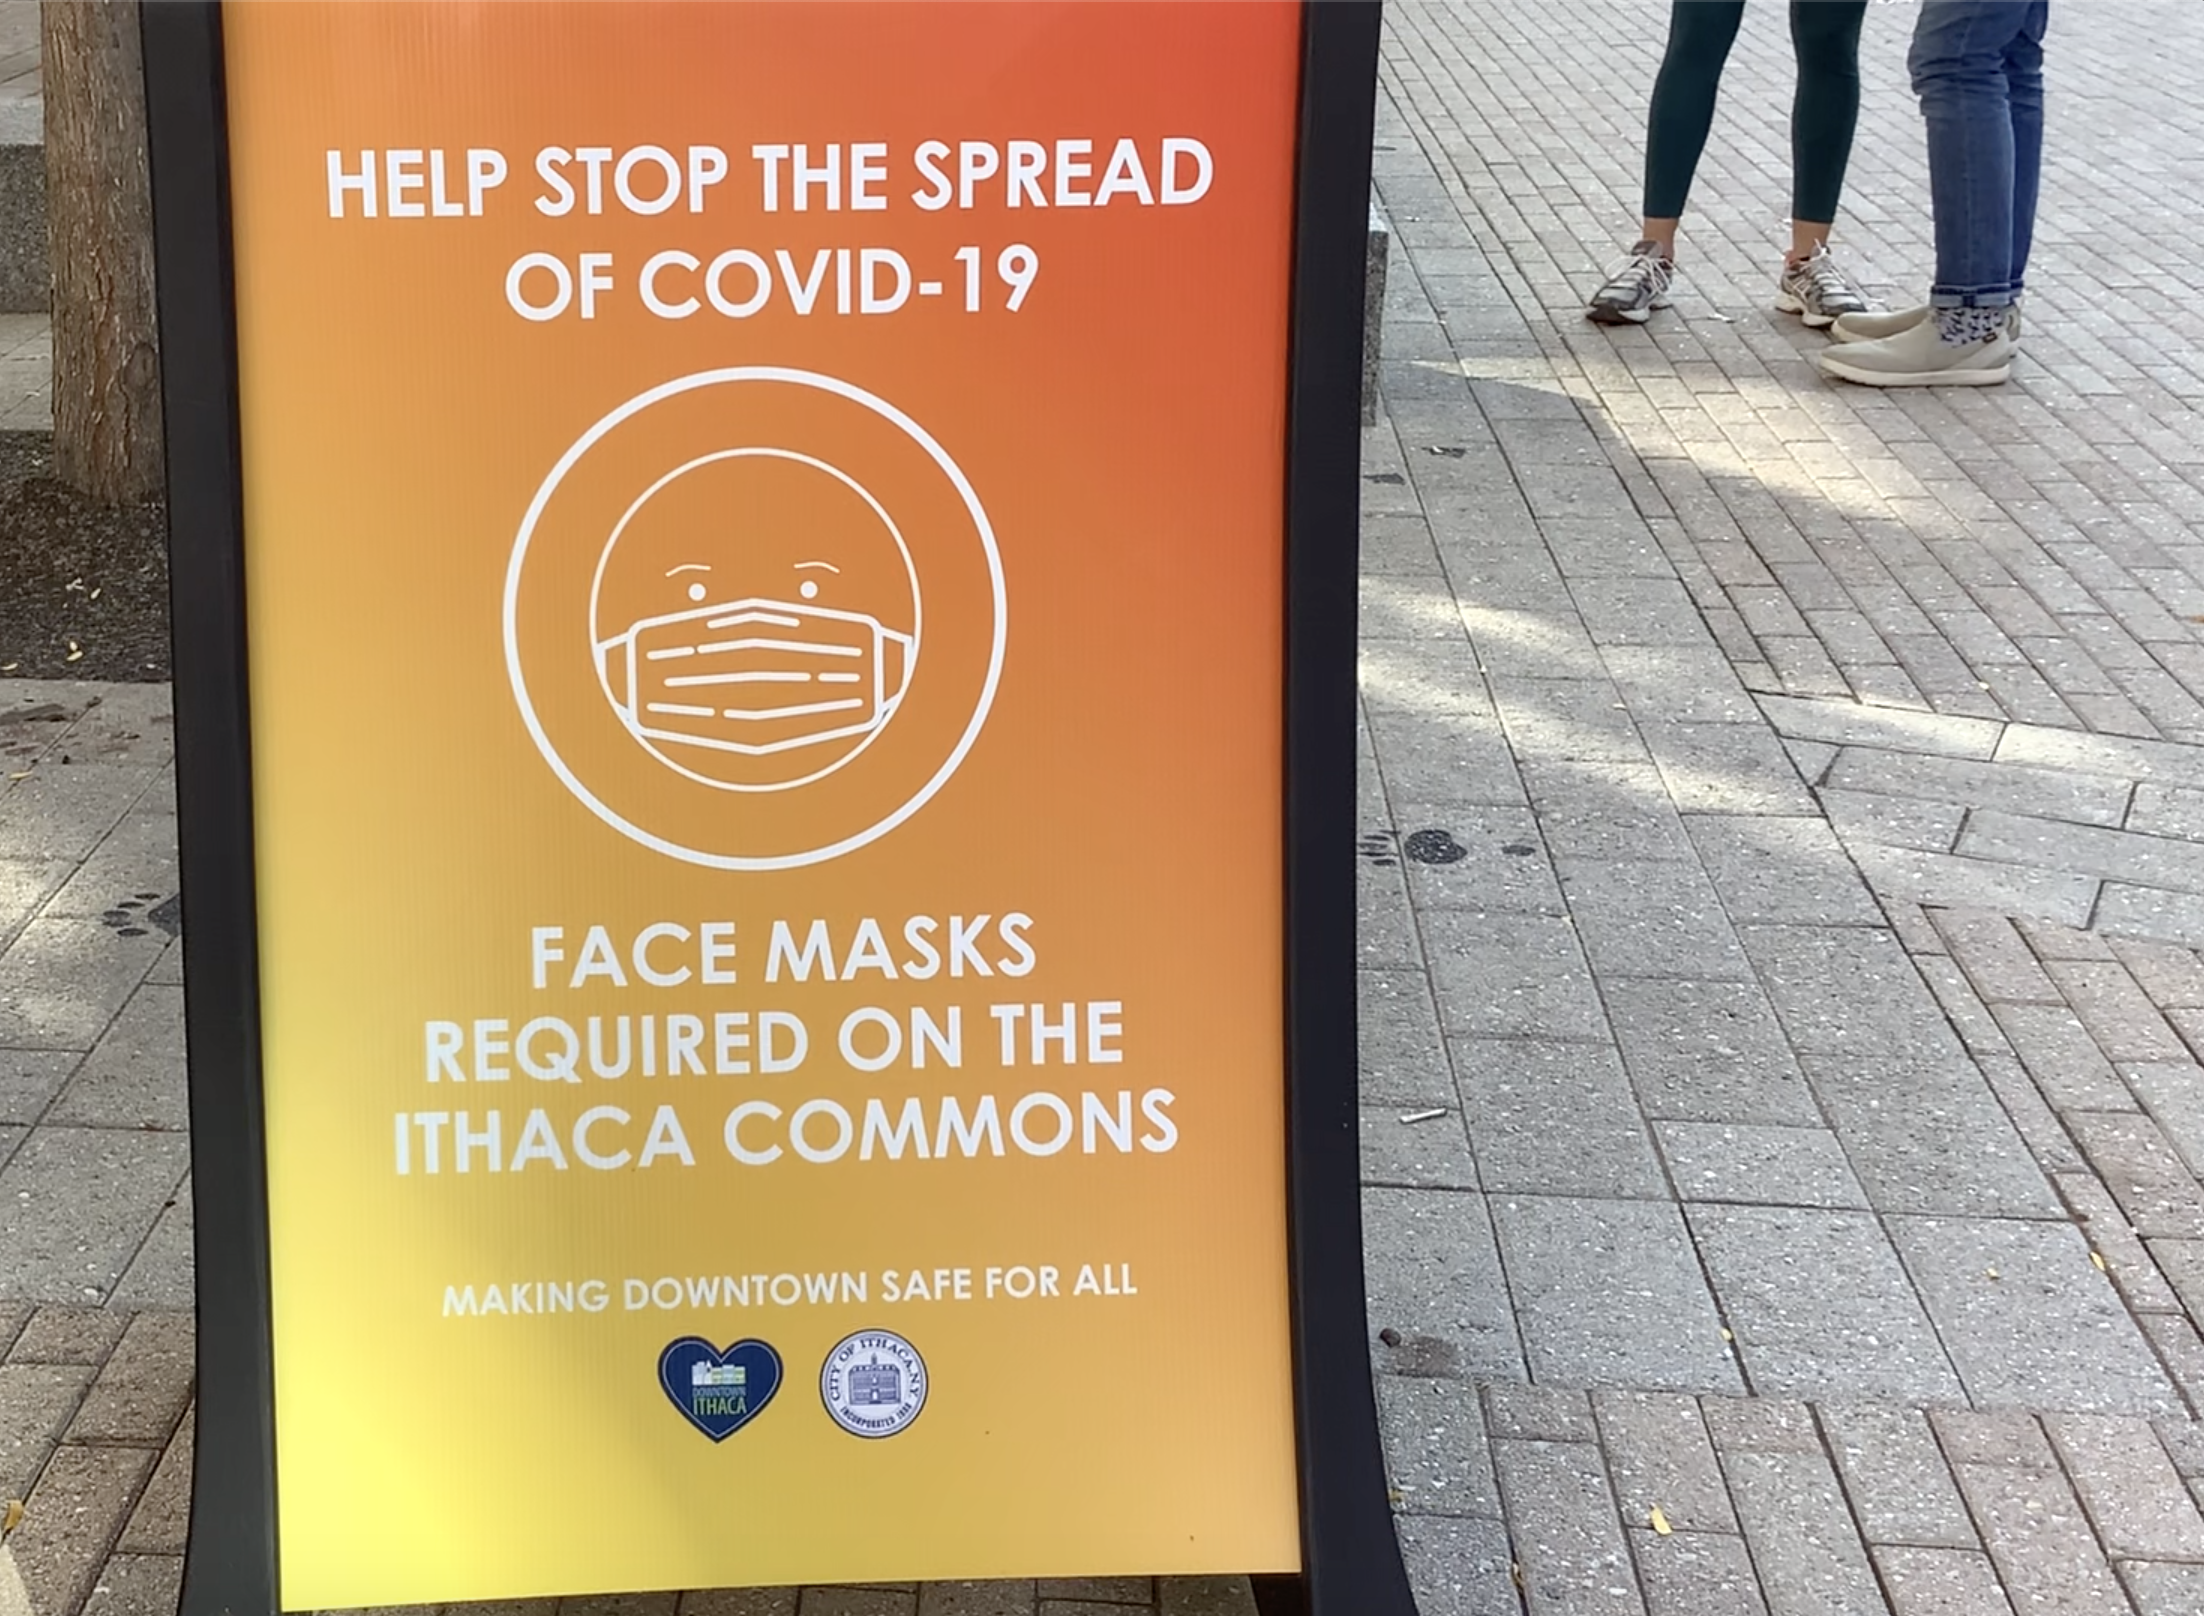 A sign requiring face masks on the Ithaca Commons. (Skylar Eagle/Ithaca Week)